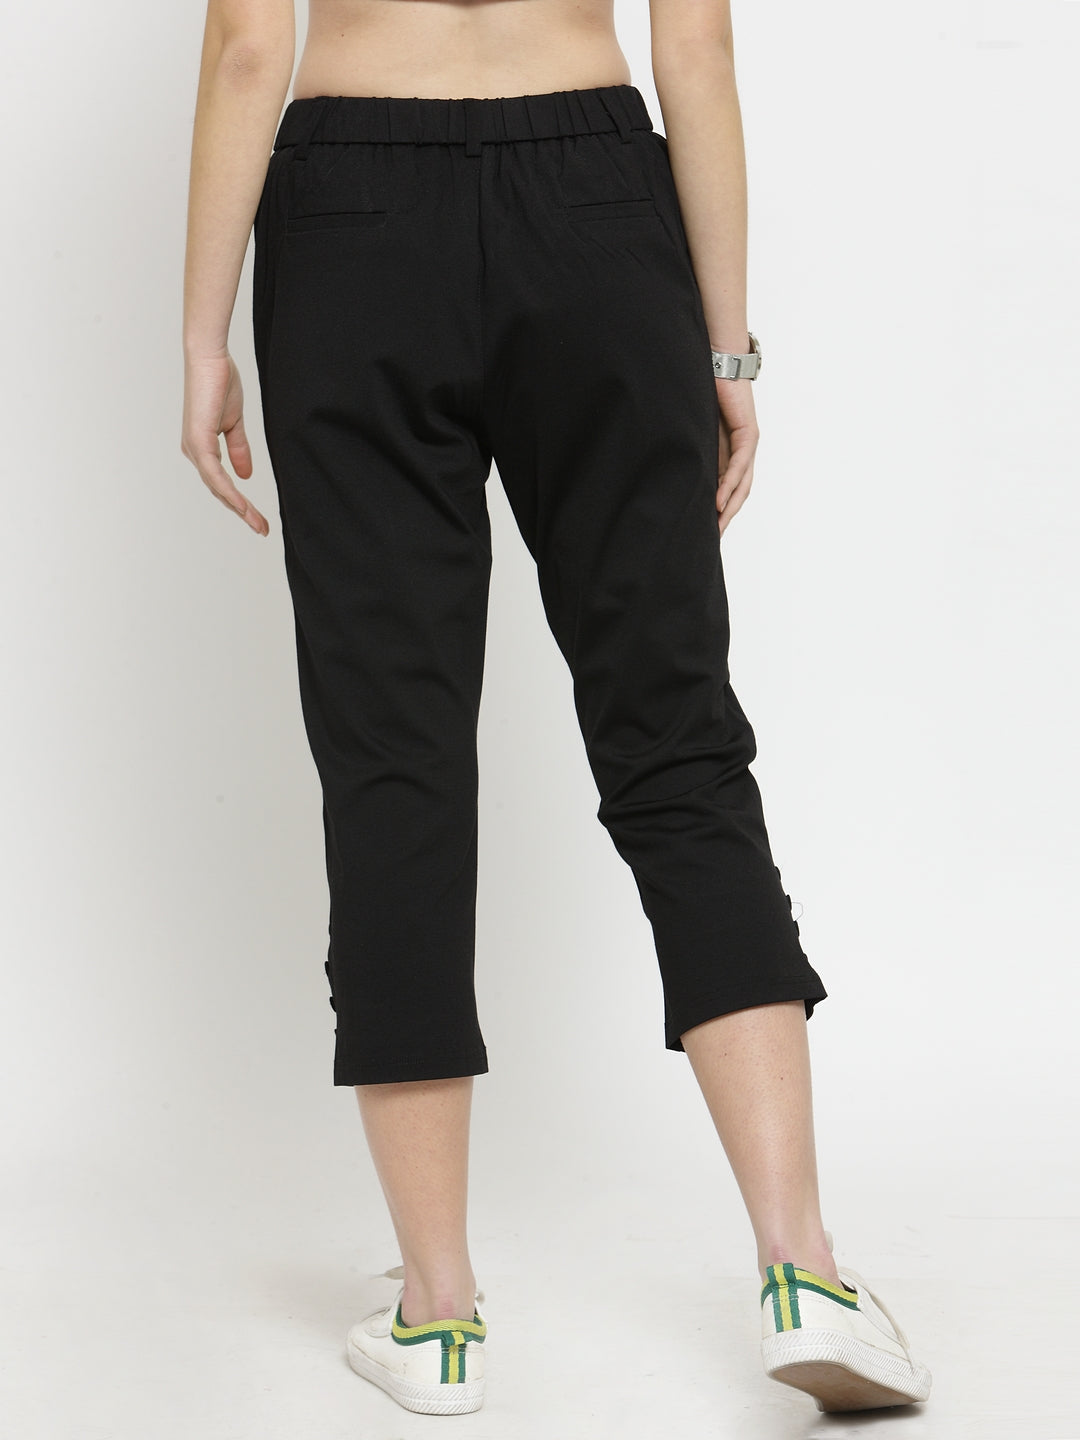 Women Tapered Fitted Solid Black Capri